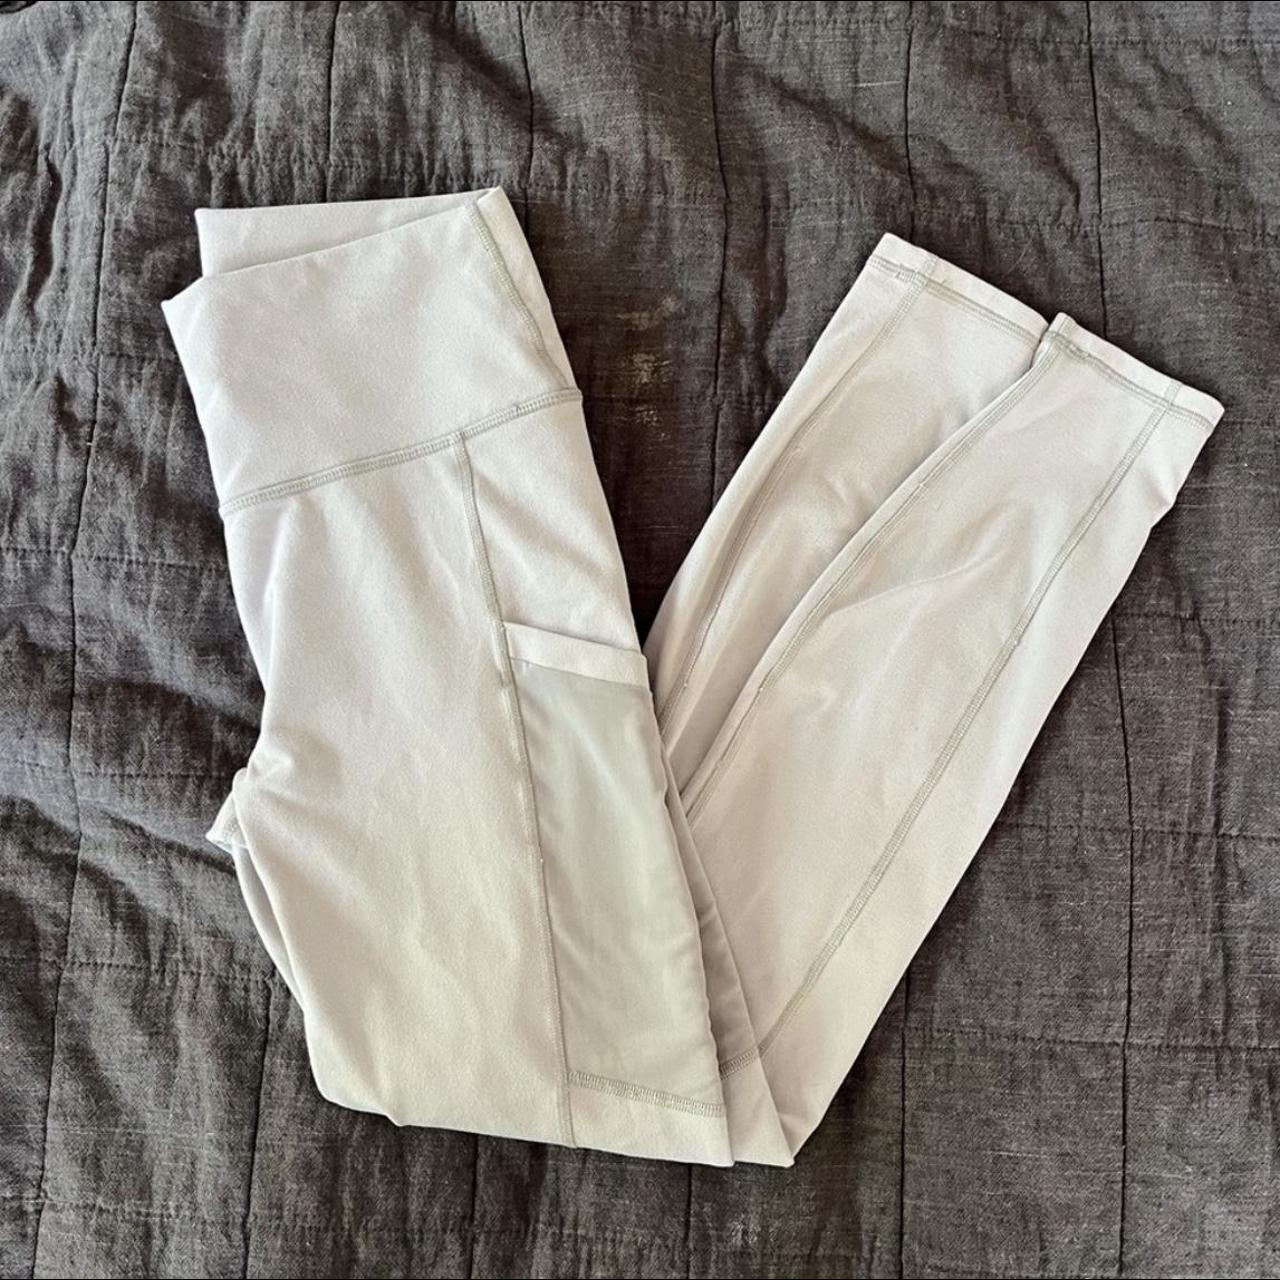 Fabletics high waisted powerHold leggings with side - Depop